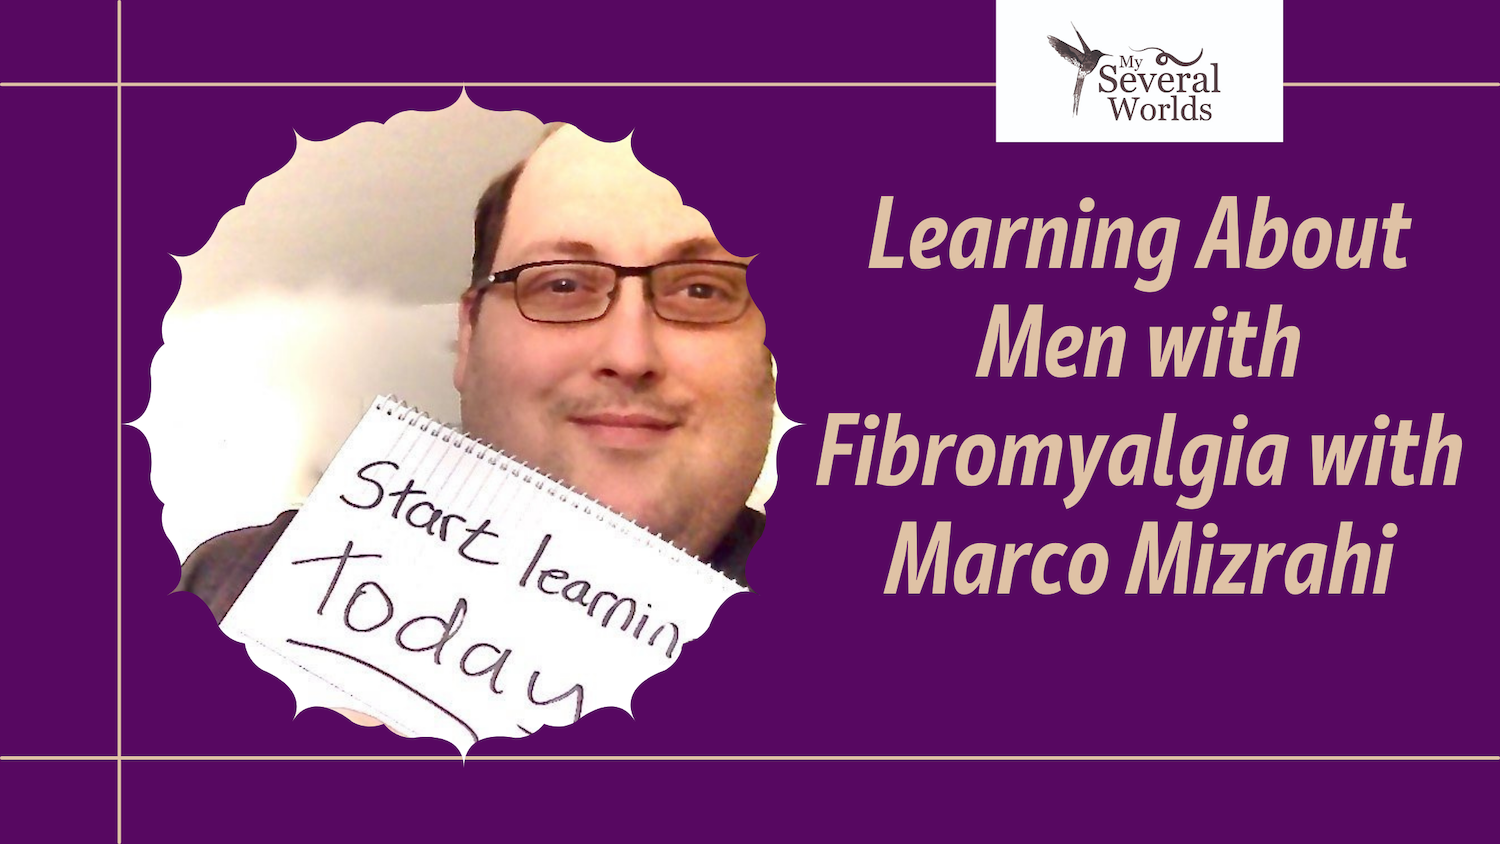 Men with fibromyalgia - My Several Worlds